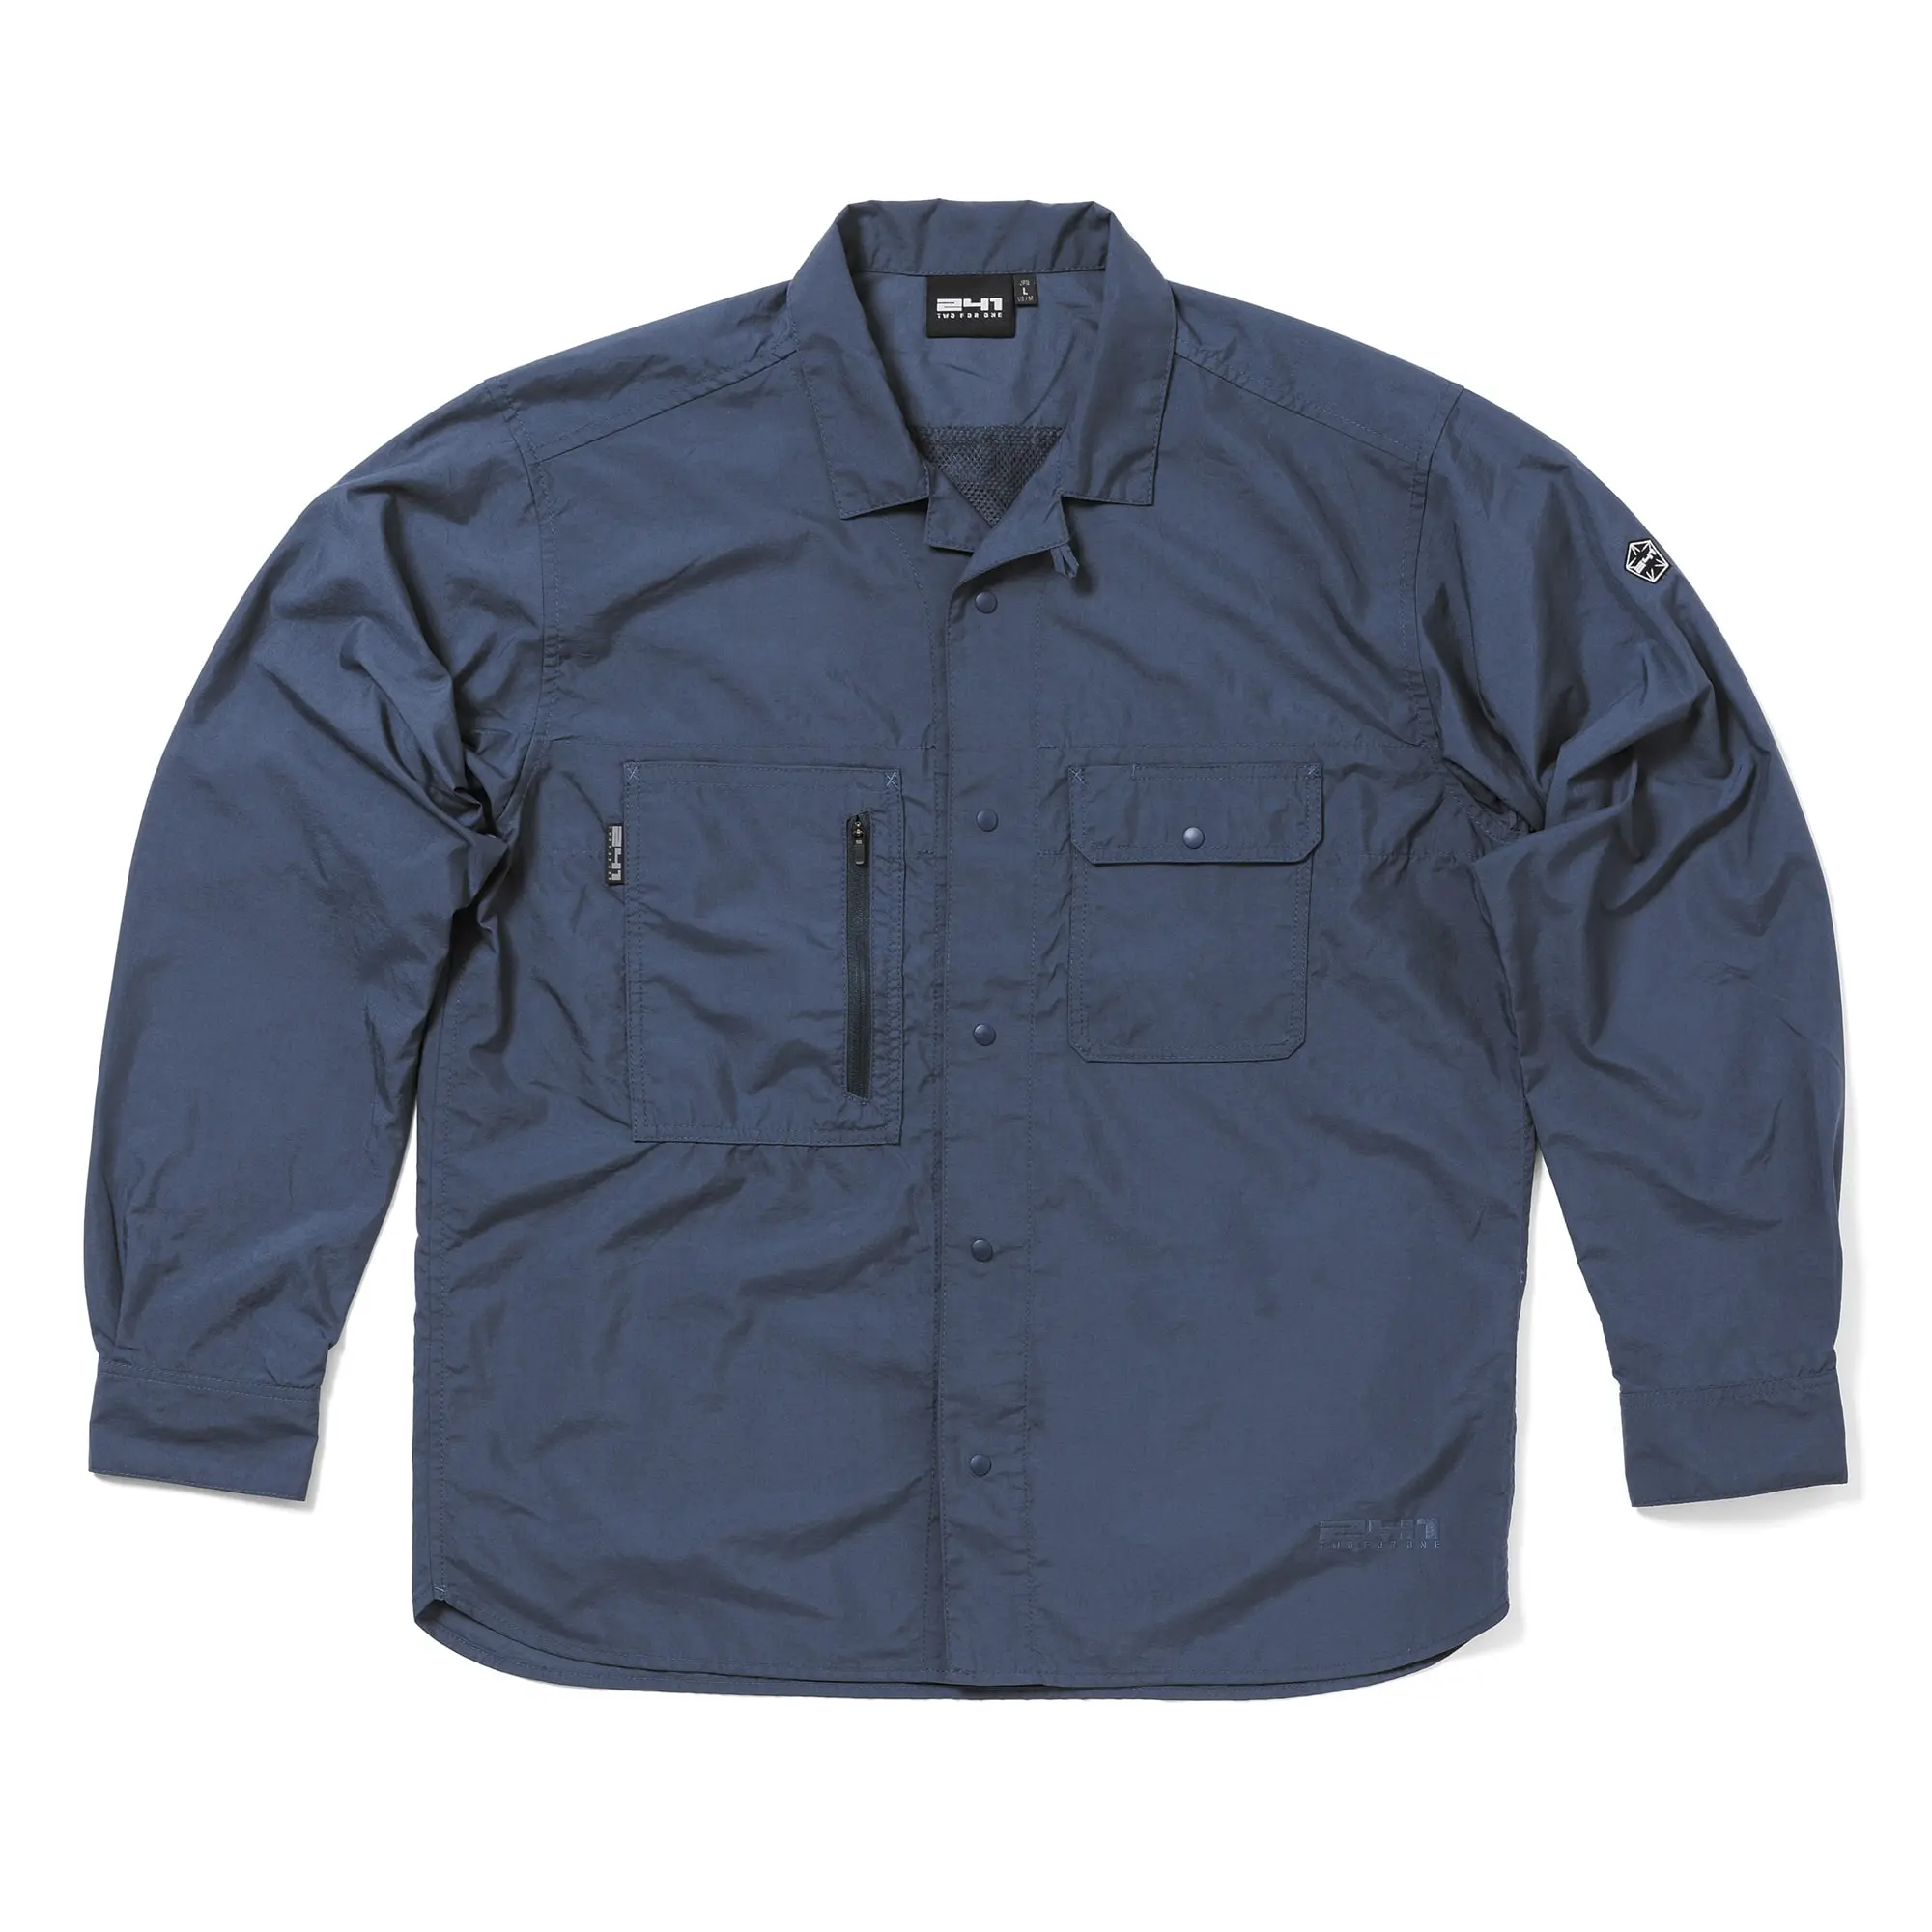 AREA241-DWR WORK LS SHIRTS
COLOR: NIGHT
¥16,500（tax incl.） MB4307